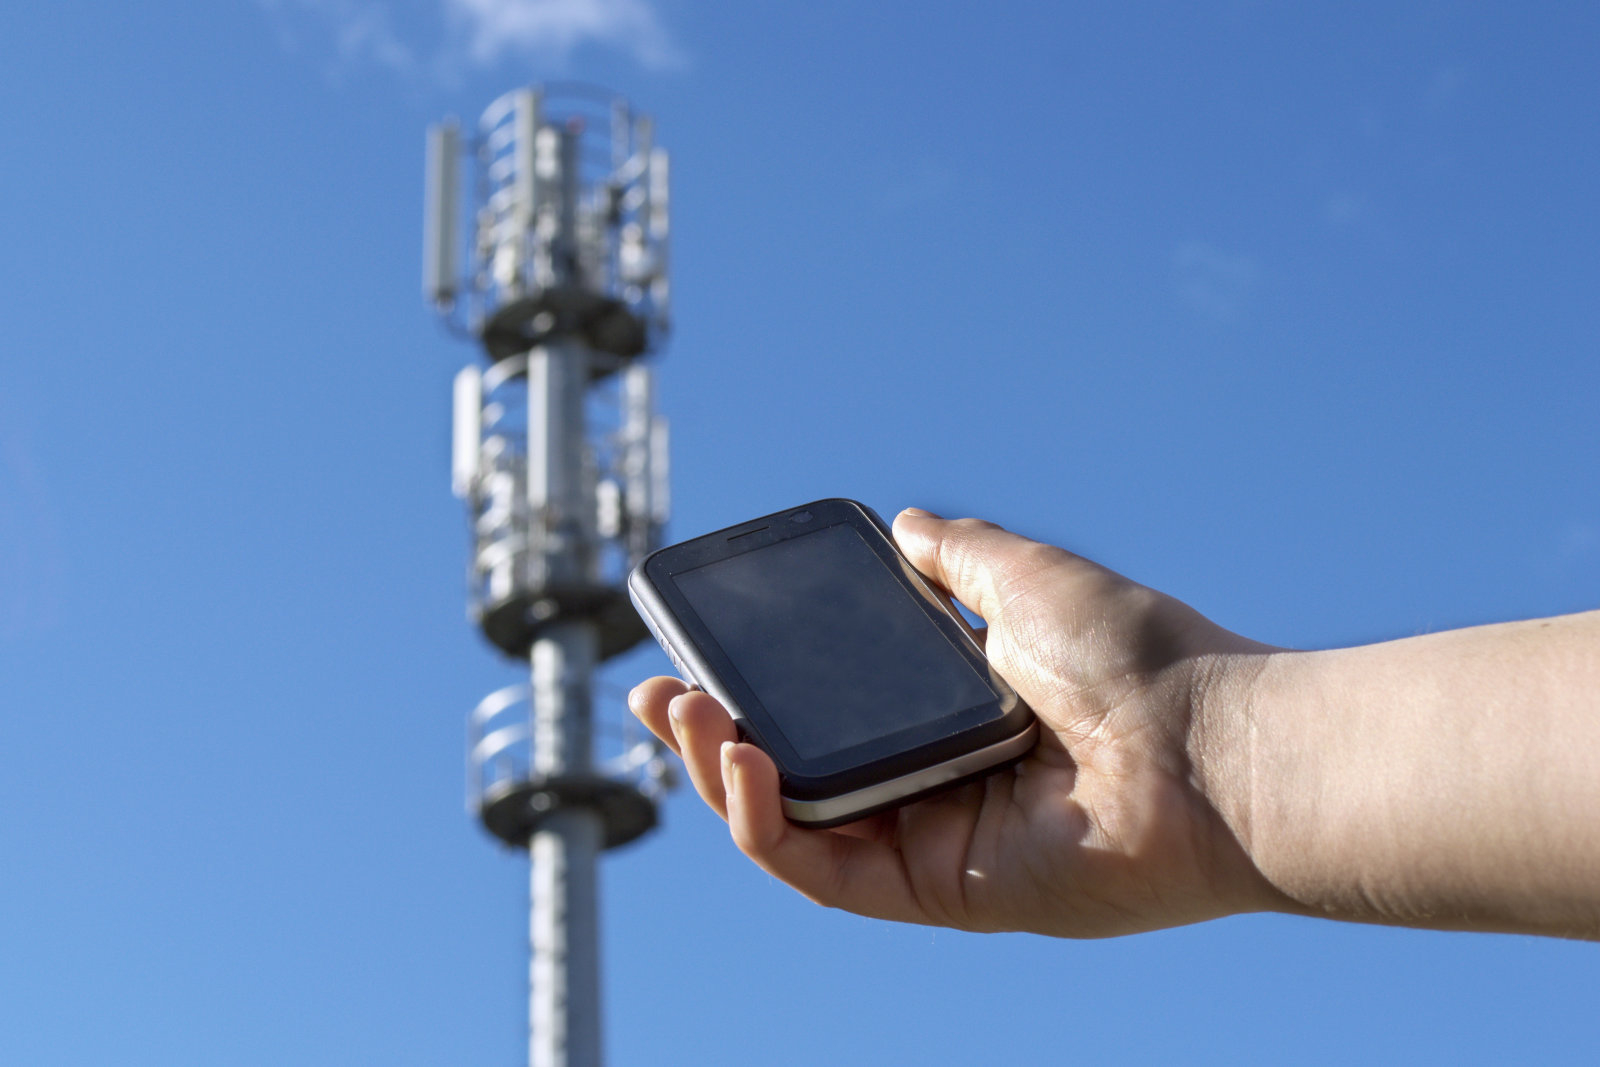 2 Bills forwarded for using Fake Cell Sites in the U.S